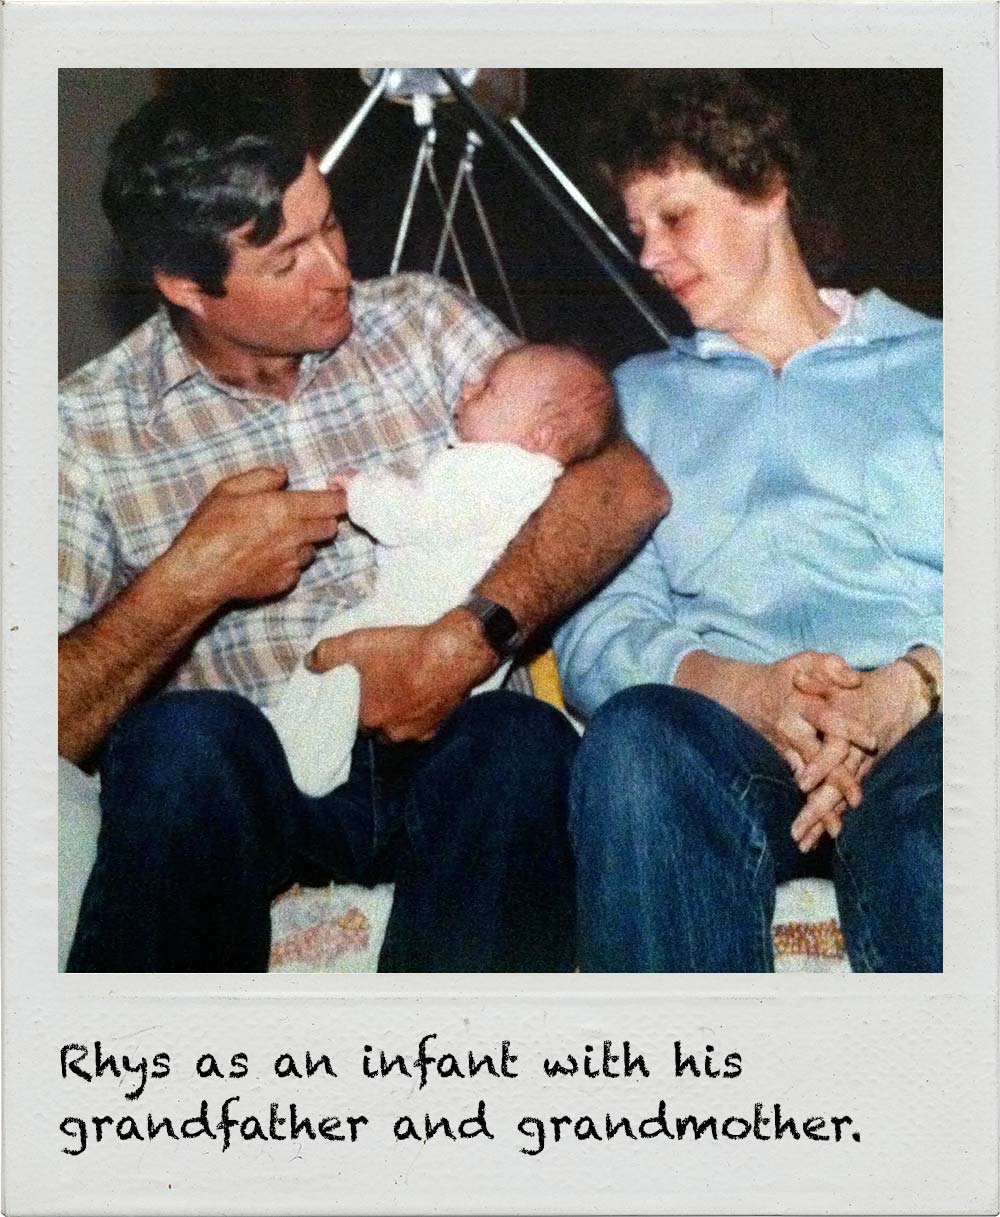 Rhys as an infant with his grandfather and grandmother.